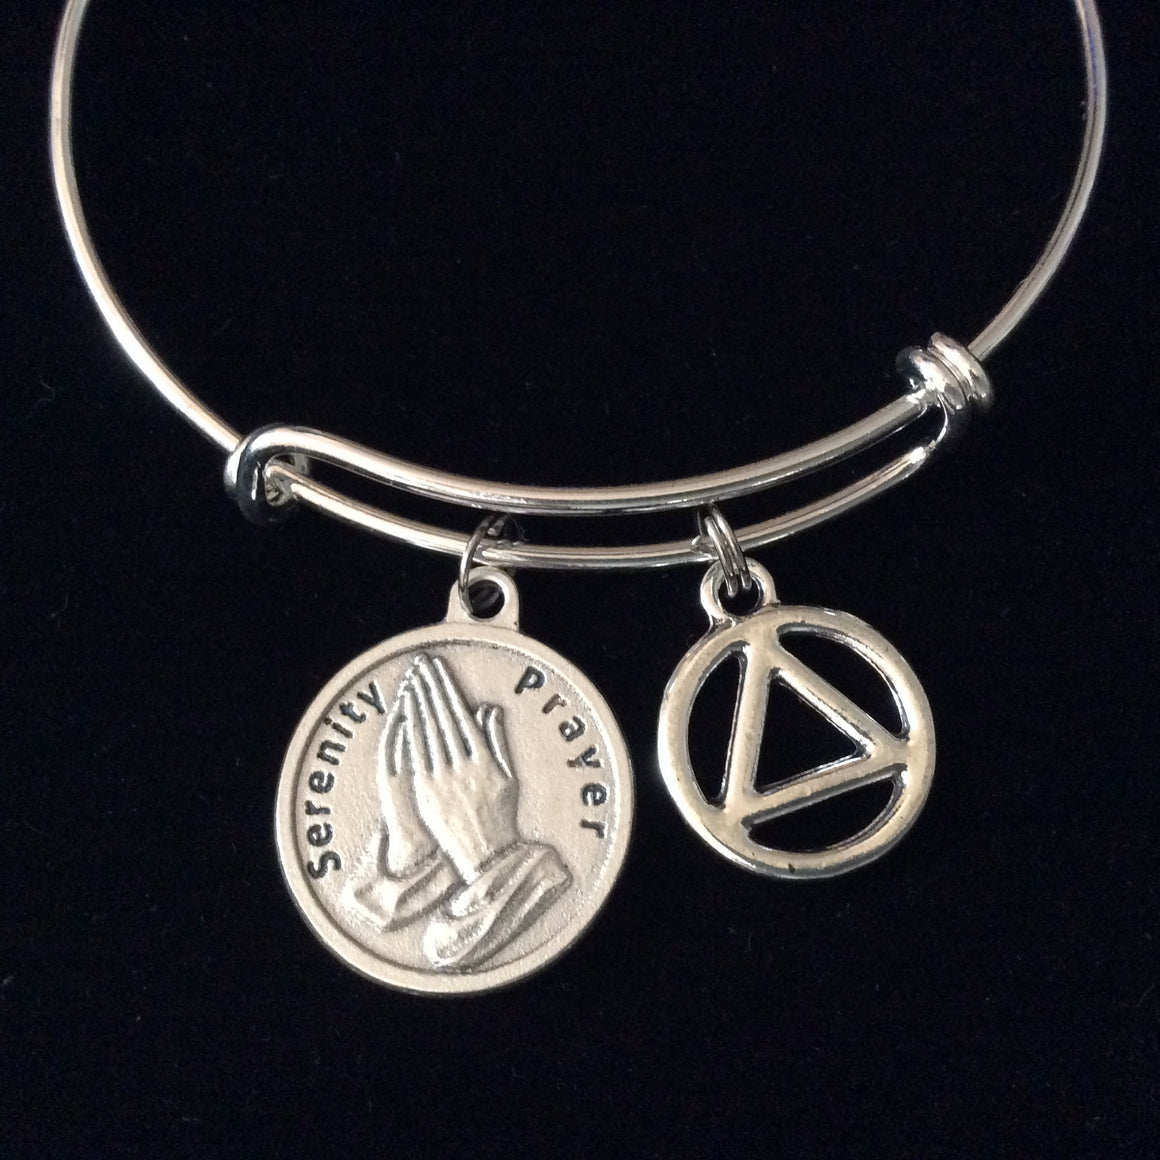 Serenity Prayer AA Silver Expandable Charm Bracelet Adjustable Wire Bangle Inspirational Meaningful Recovery Gift Alcoholics Anonymous